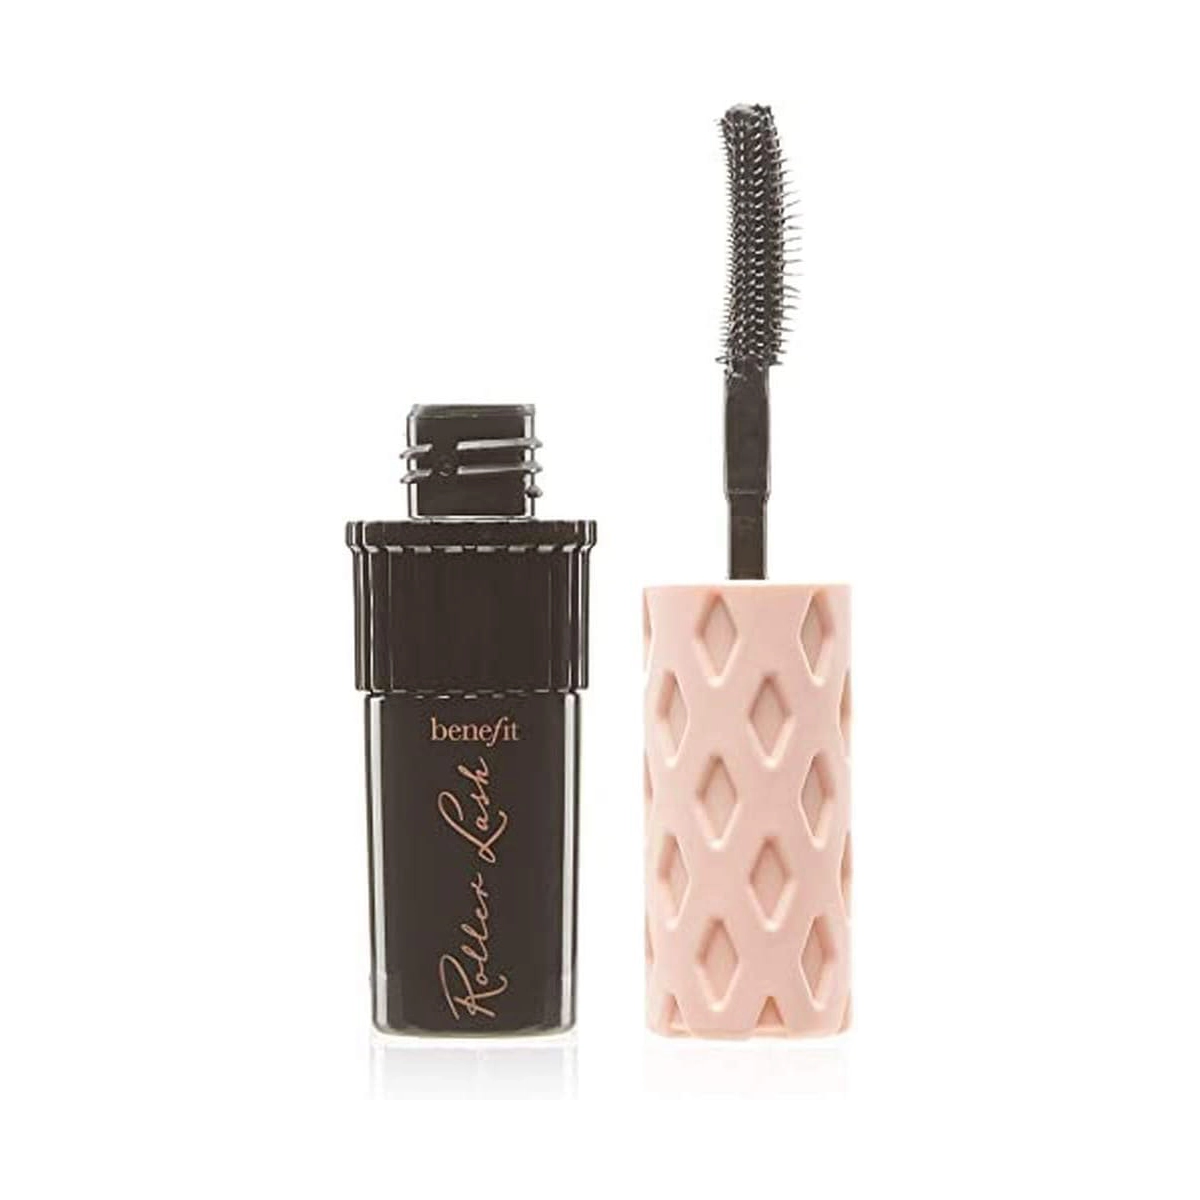 Benefit Roller Lash Curling Mascara - a mascara tube on a white background